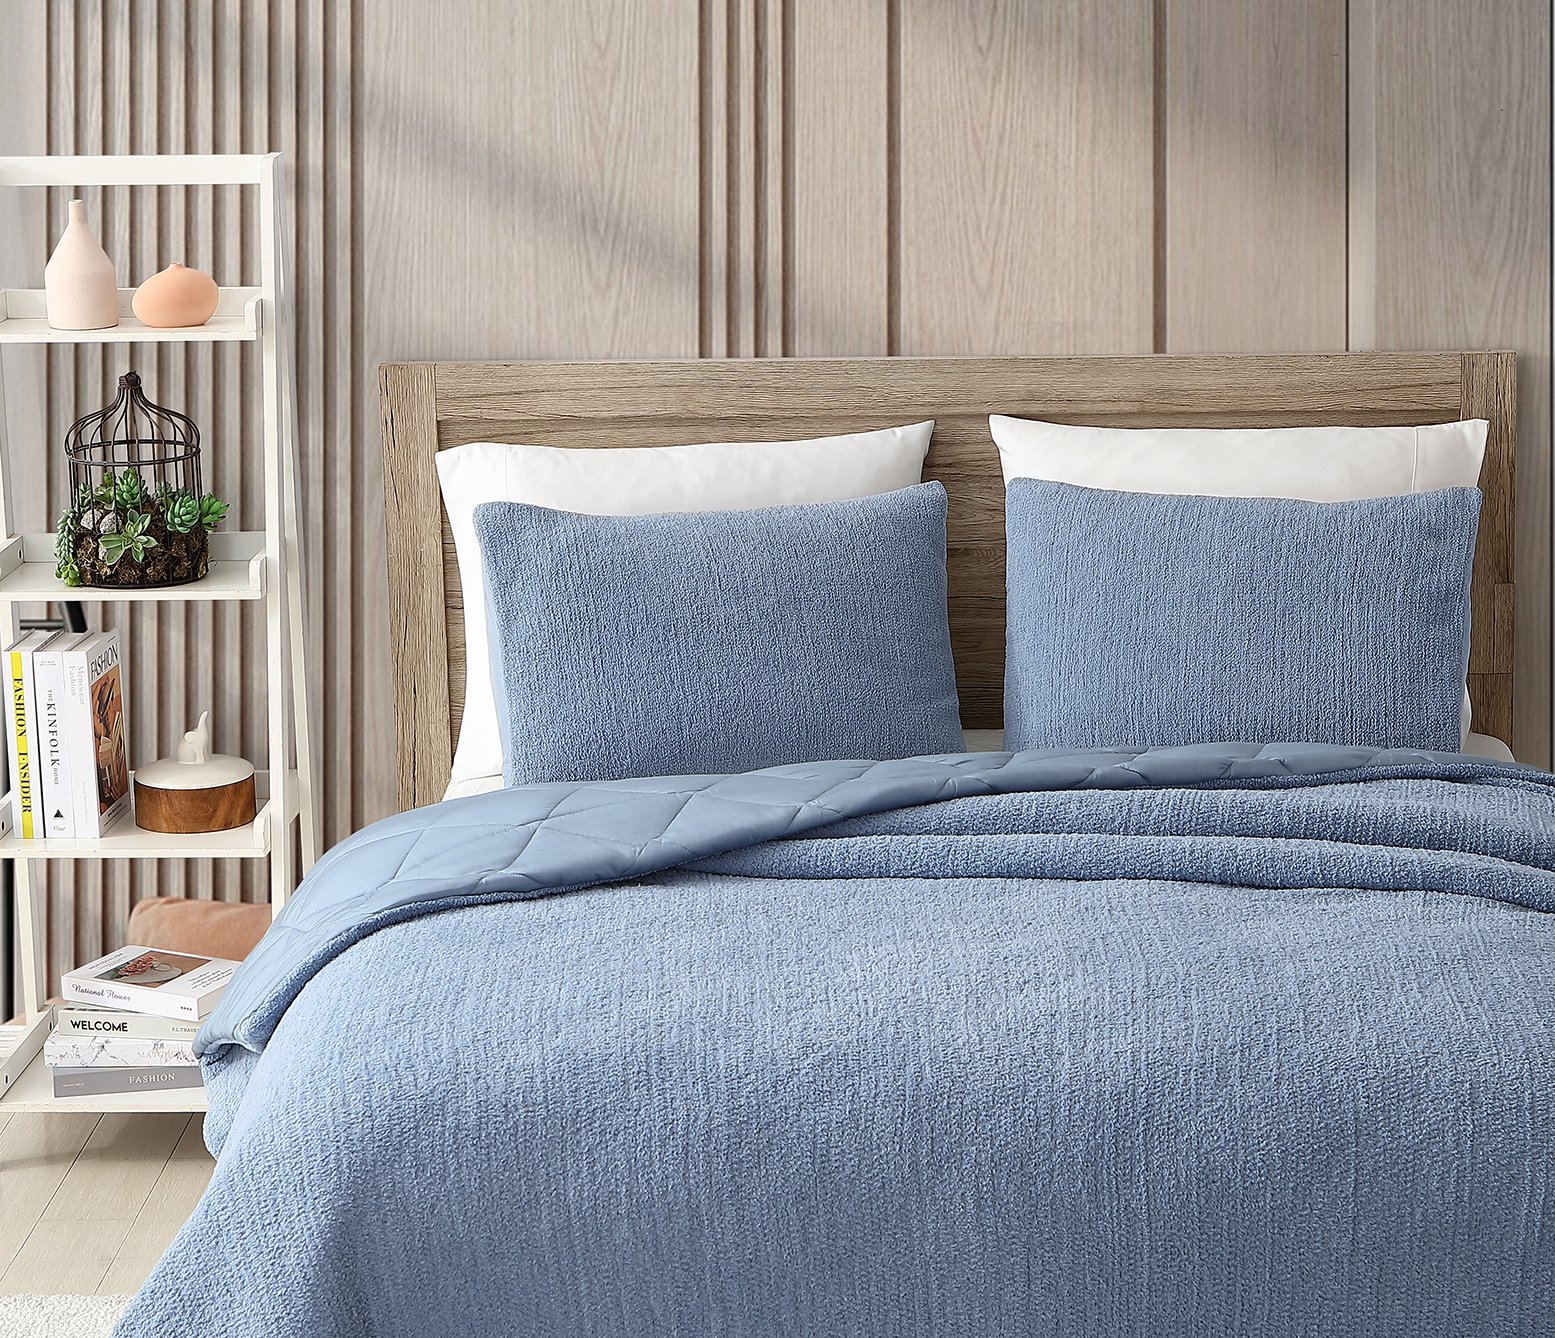 What is a Sham? Sunday Citizen's Snug + Bamboo Sham Set in Denim. Snug Comforter in Denim. Simple bed with four pillows and a fuzzy blue comforter. Blue bed.